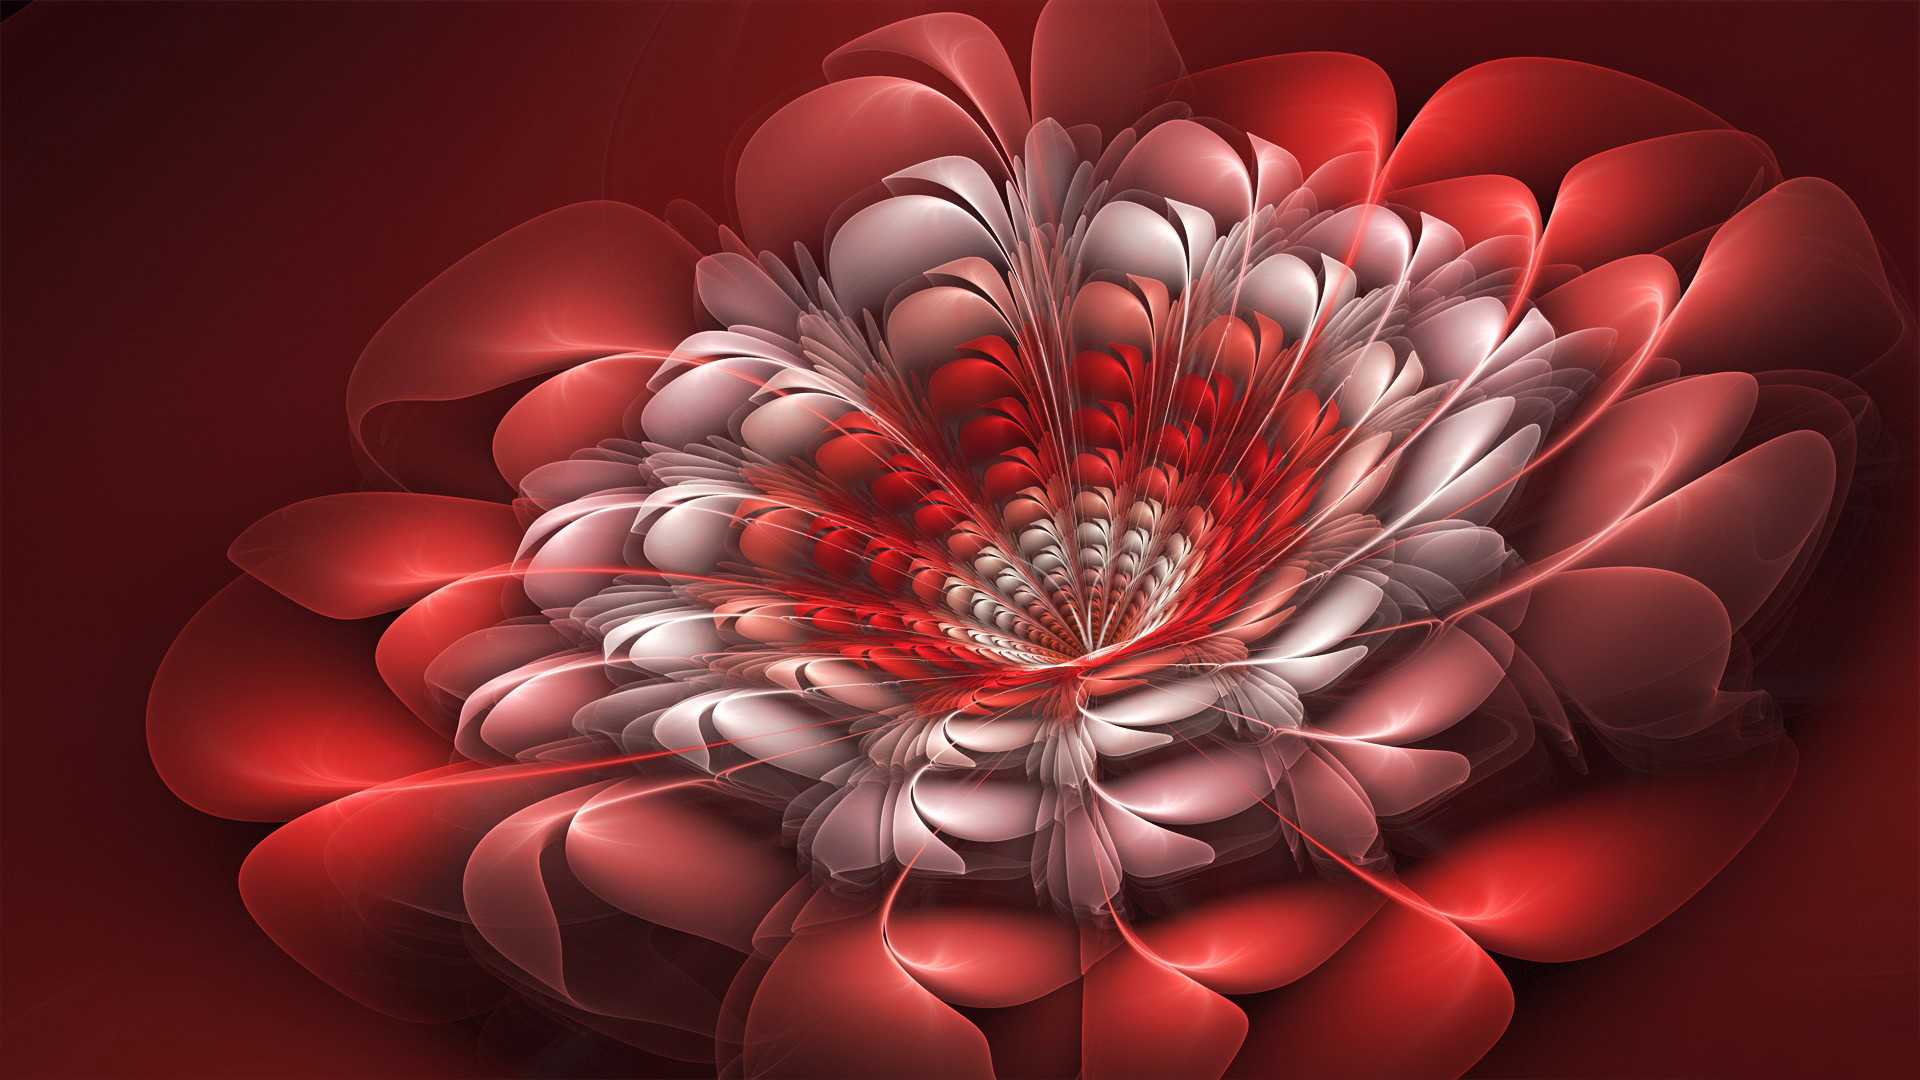 Download Beautiful Red Flower D Abstract S Wallpaper - Facebook Profile Images Flowers , HD Wallpaper & Backgrounds